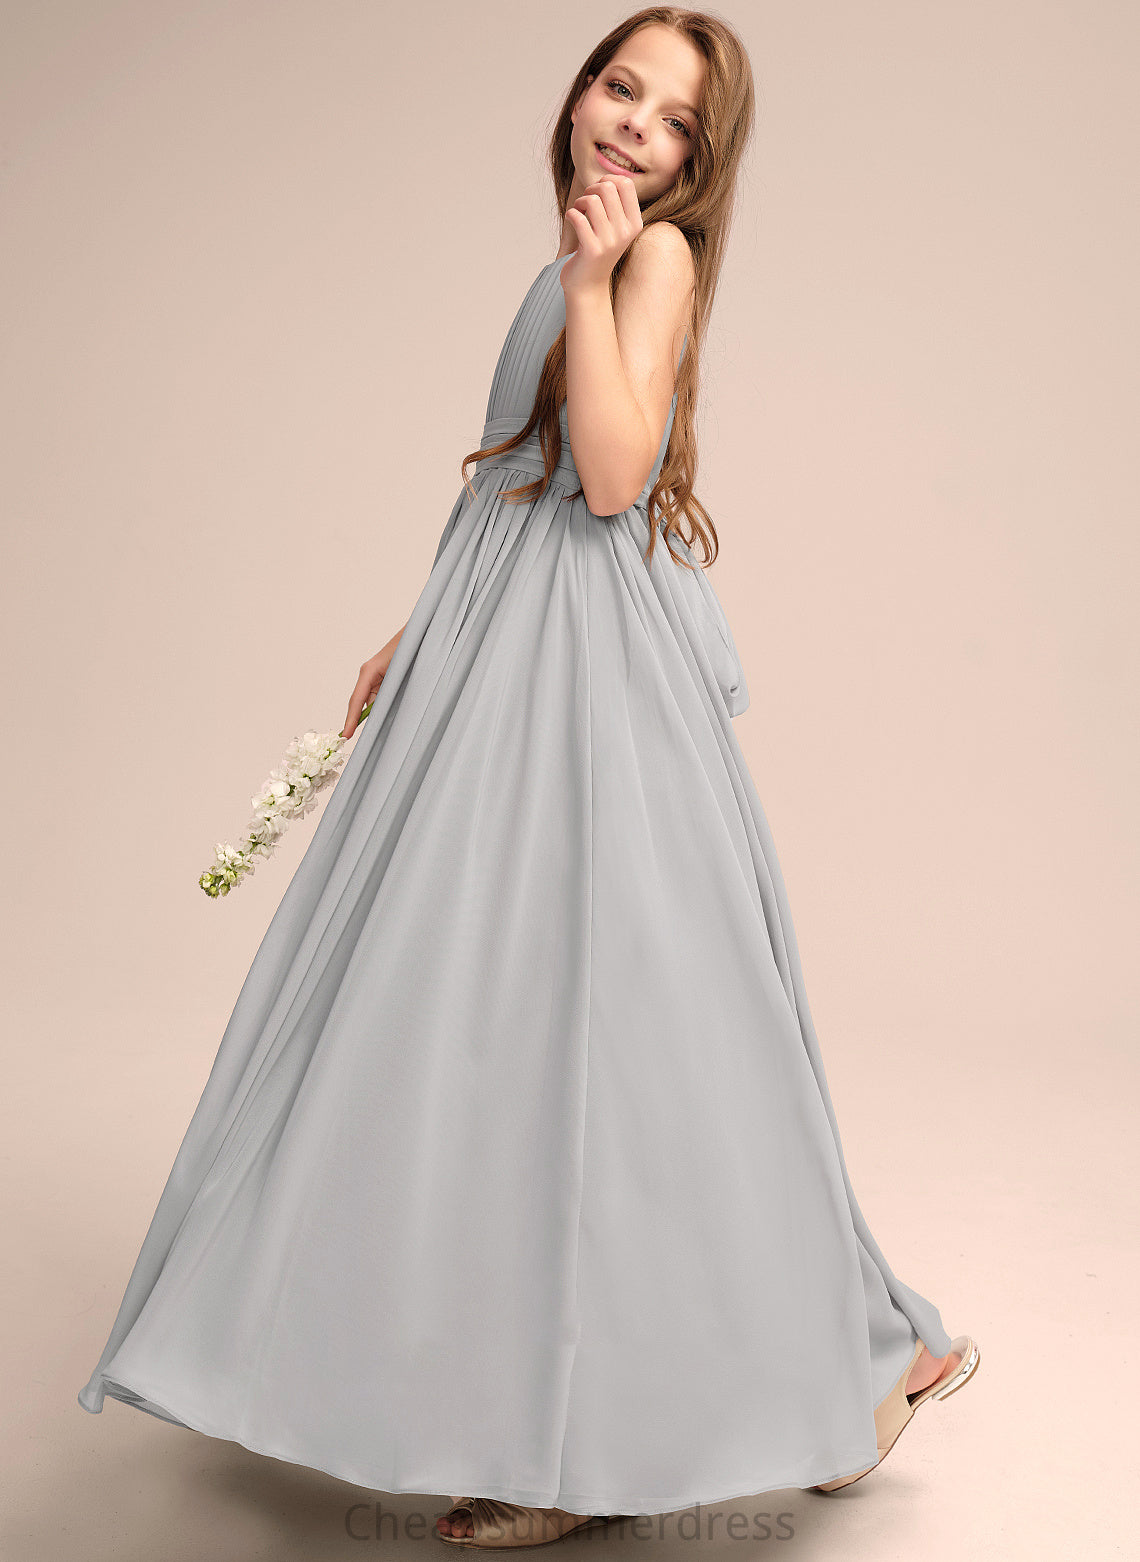 Junior Bridesmaid Dresses Lina Ruffle With Bow(s) Neck Chiffon Scoop Floor-Length A-Line